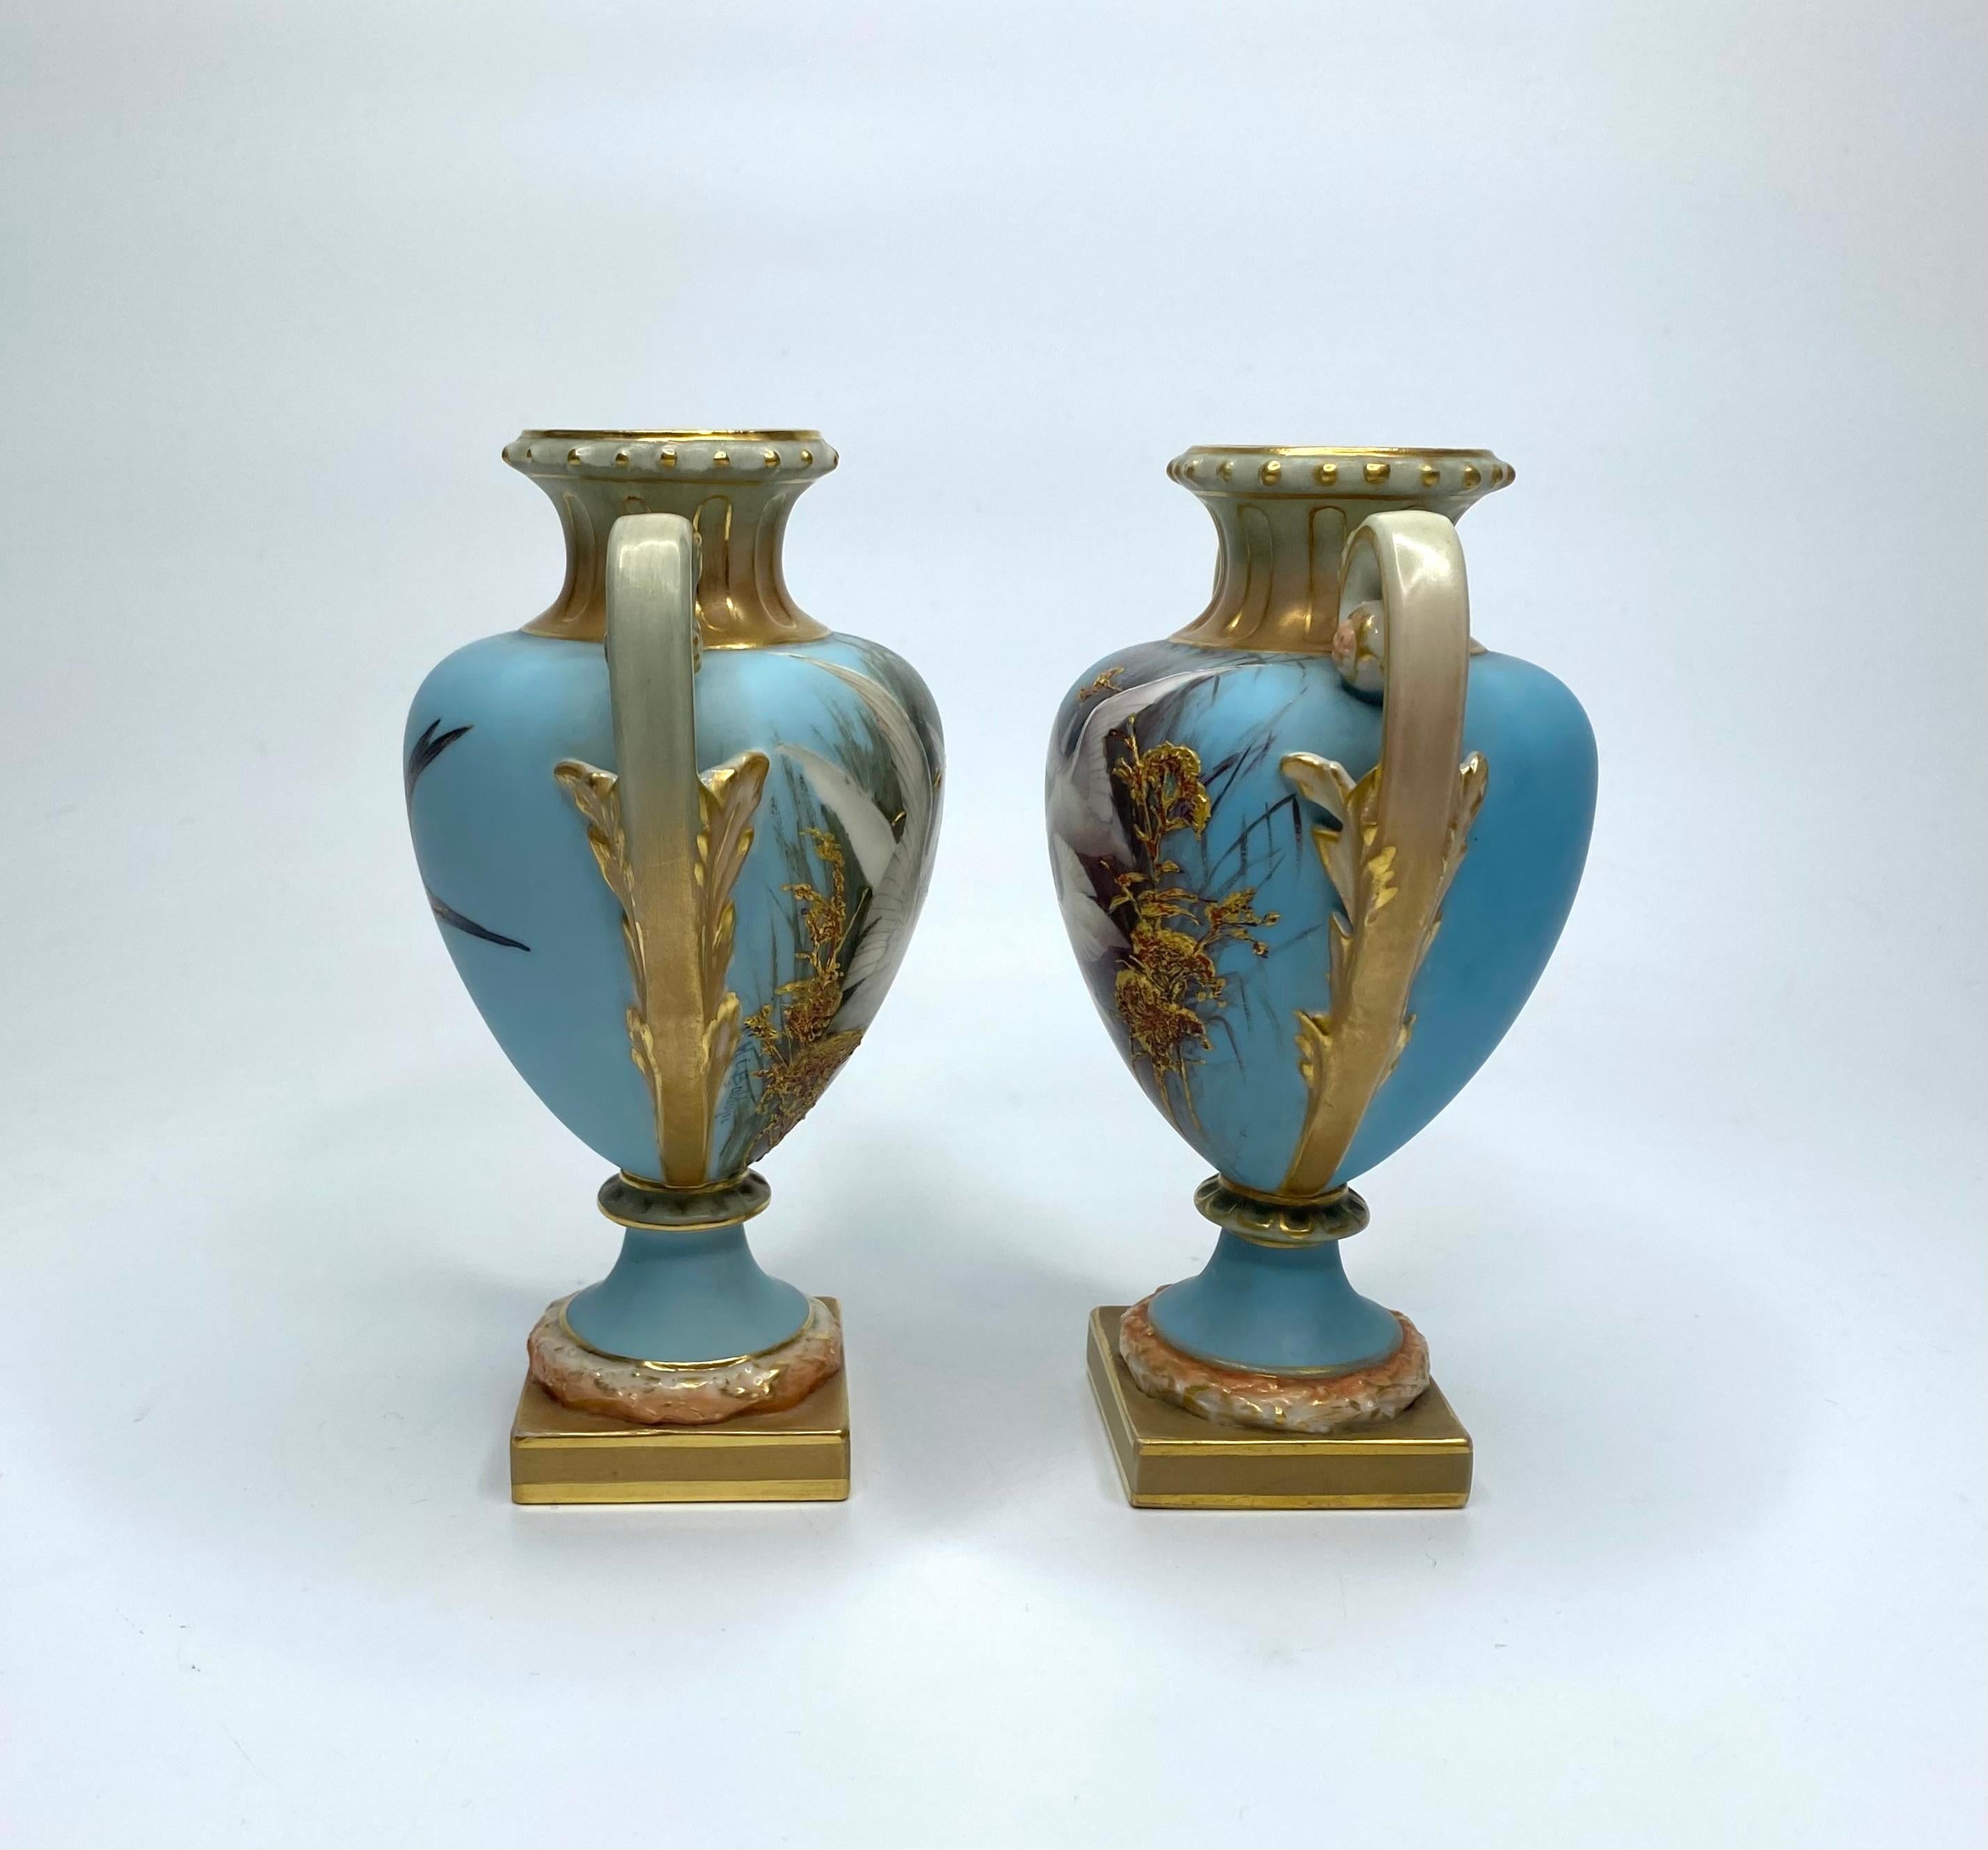 A fine pair of Royal Worcester porcelain vases, painted by Charles Baldwyn, dated 1904. Hand painted with swans emerging from reeds, on a turquoise ground.
The reverses with swallows in flight.
Both vases having twin scroll handles, emerging from